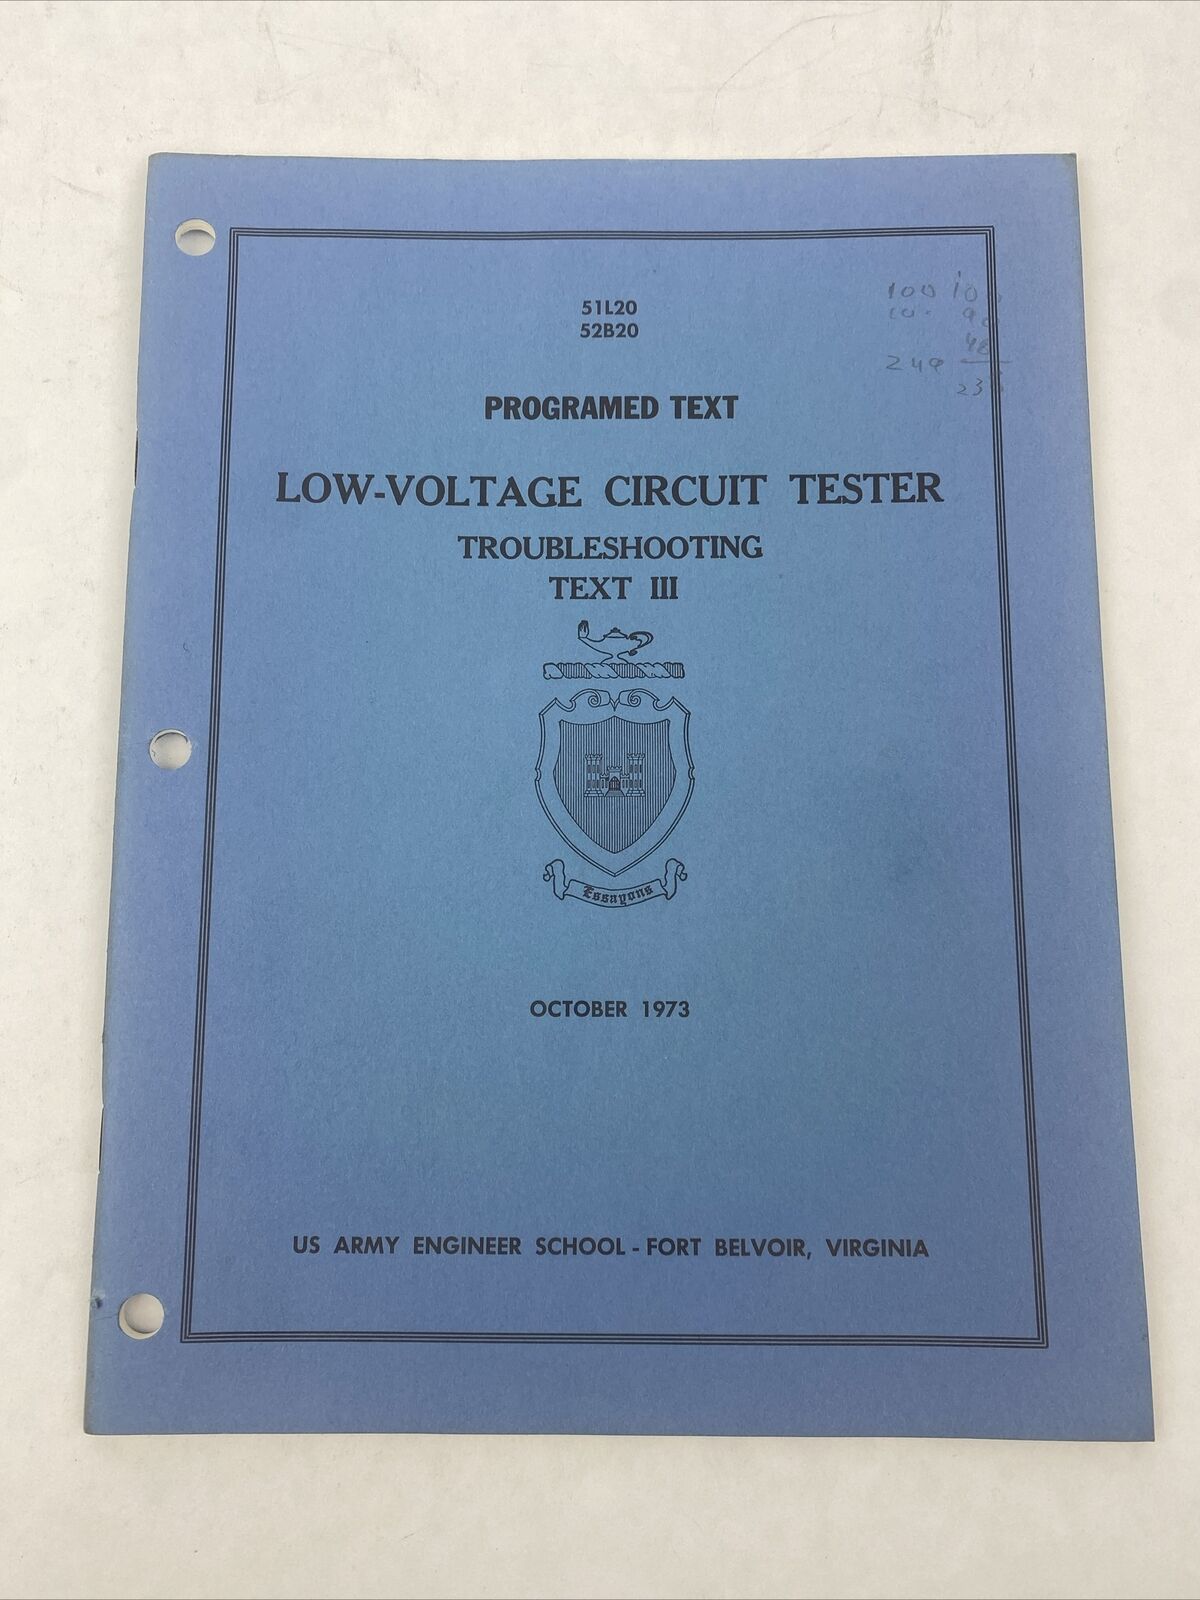 Oct 1973 US Army Engineer School Programed Text Low Voltage Circuit Tester Troul